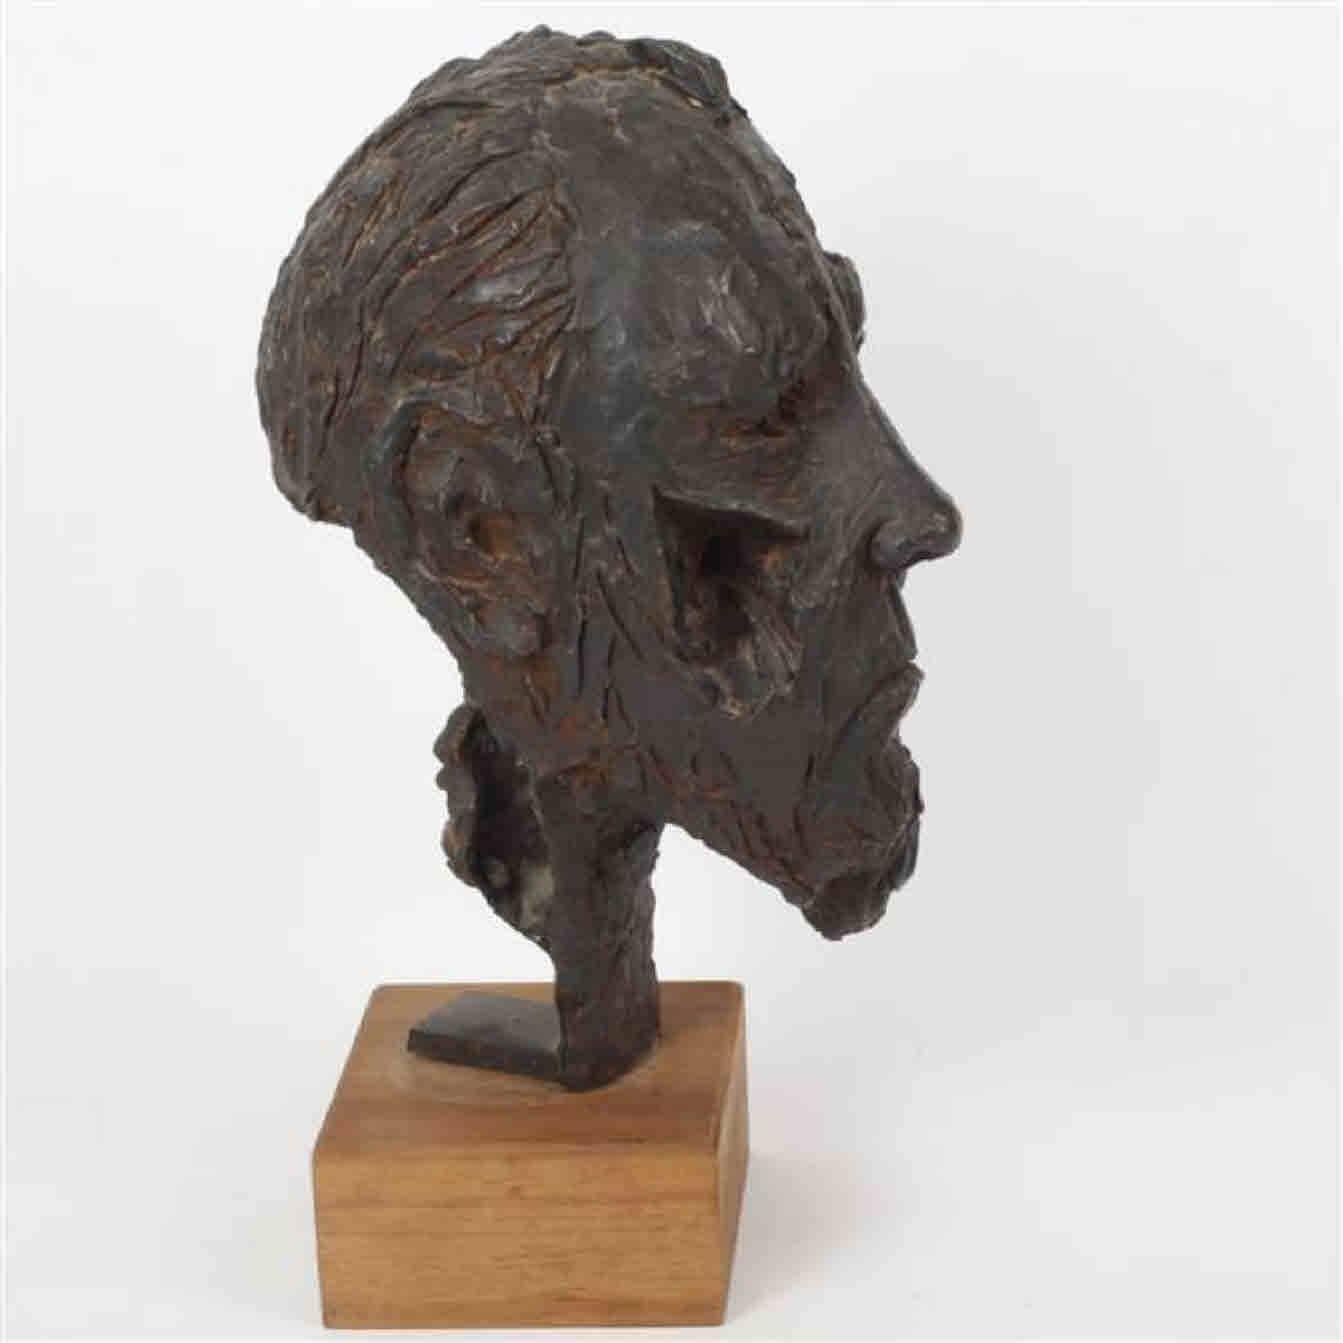 Rare bronze bust of Alexander Solzhenitsyn by Drago Cherina signed and dated 1974. Original gallery price 16,000 AUD in 1974.